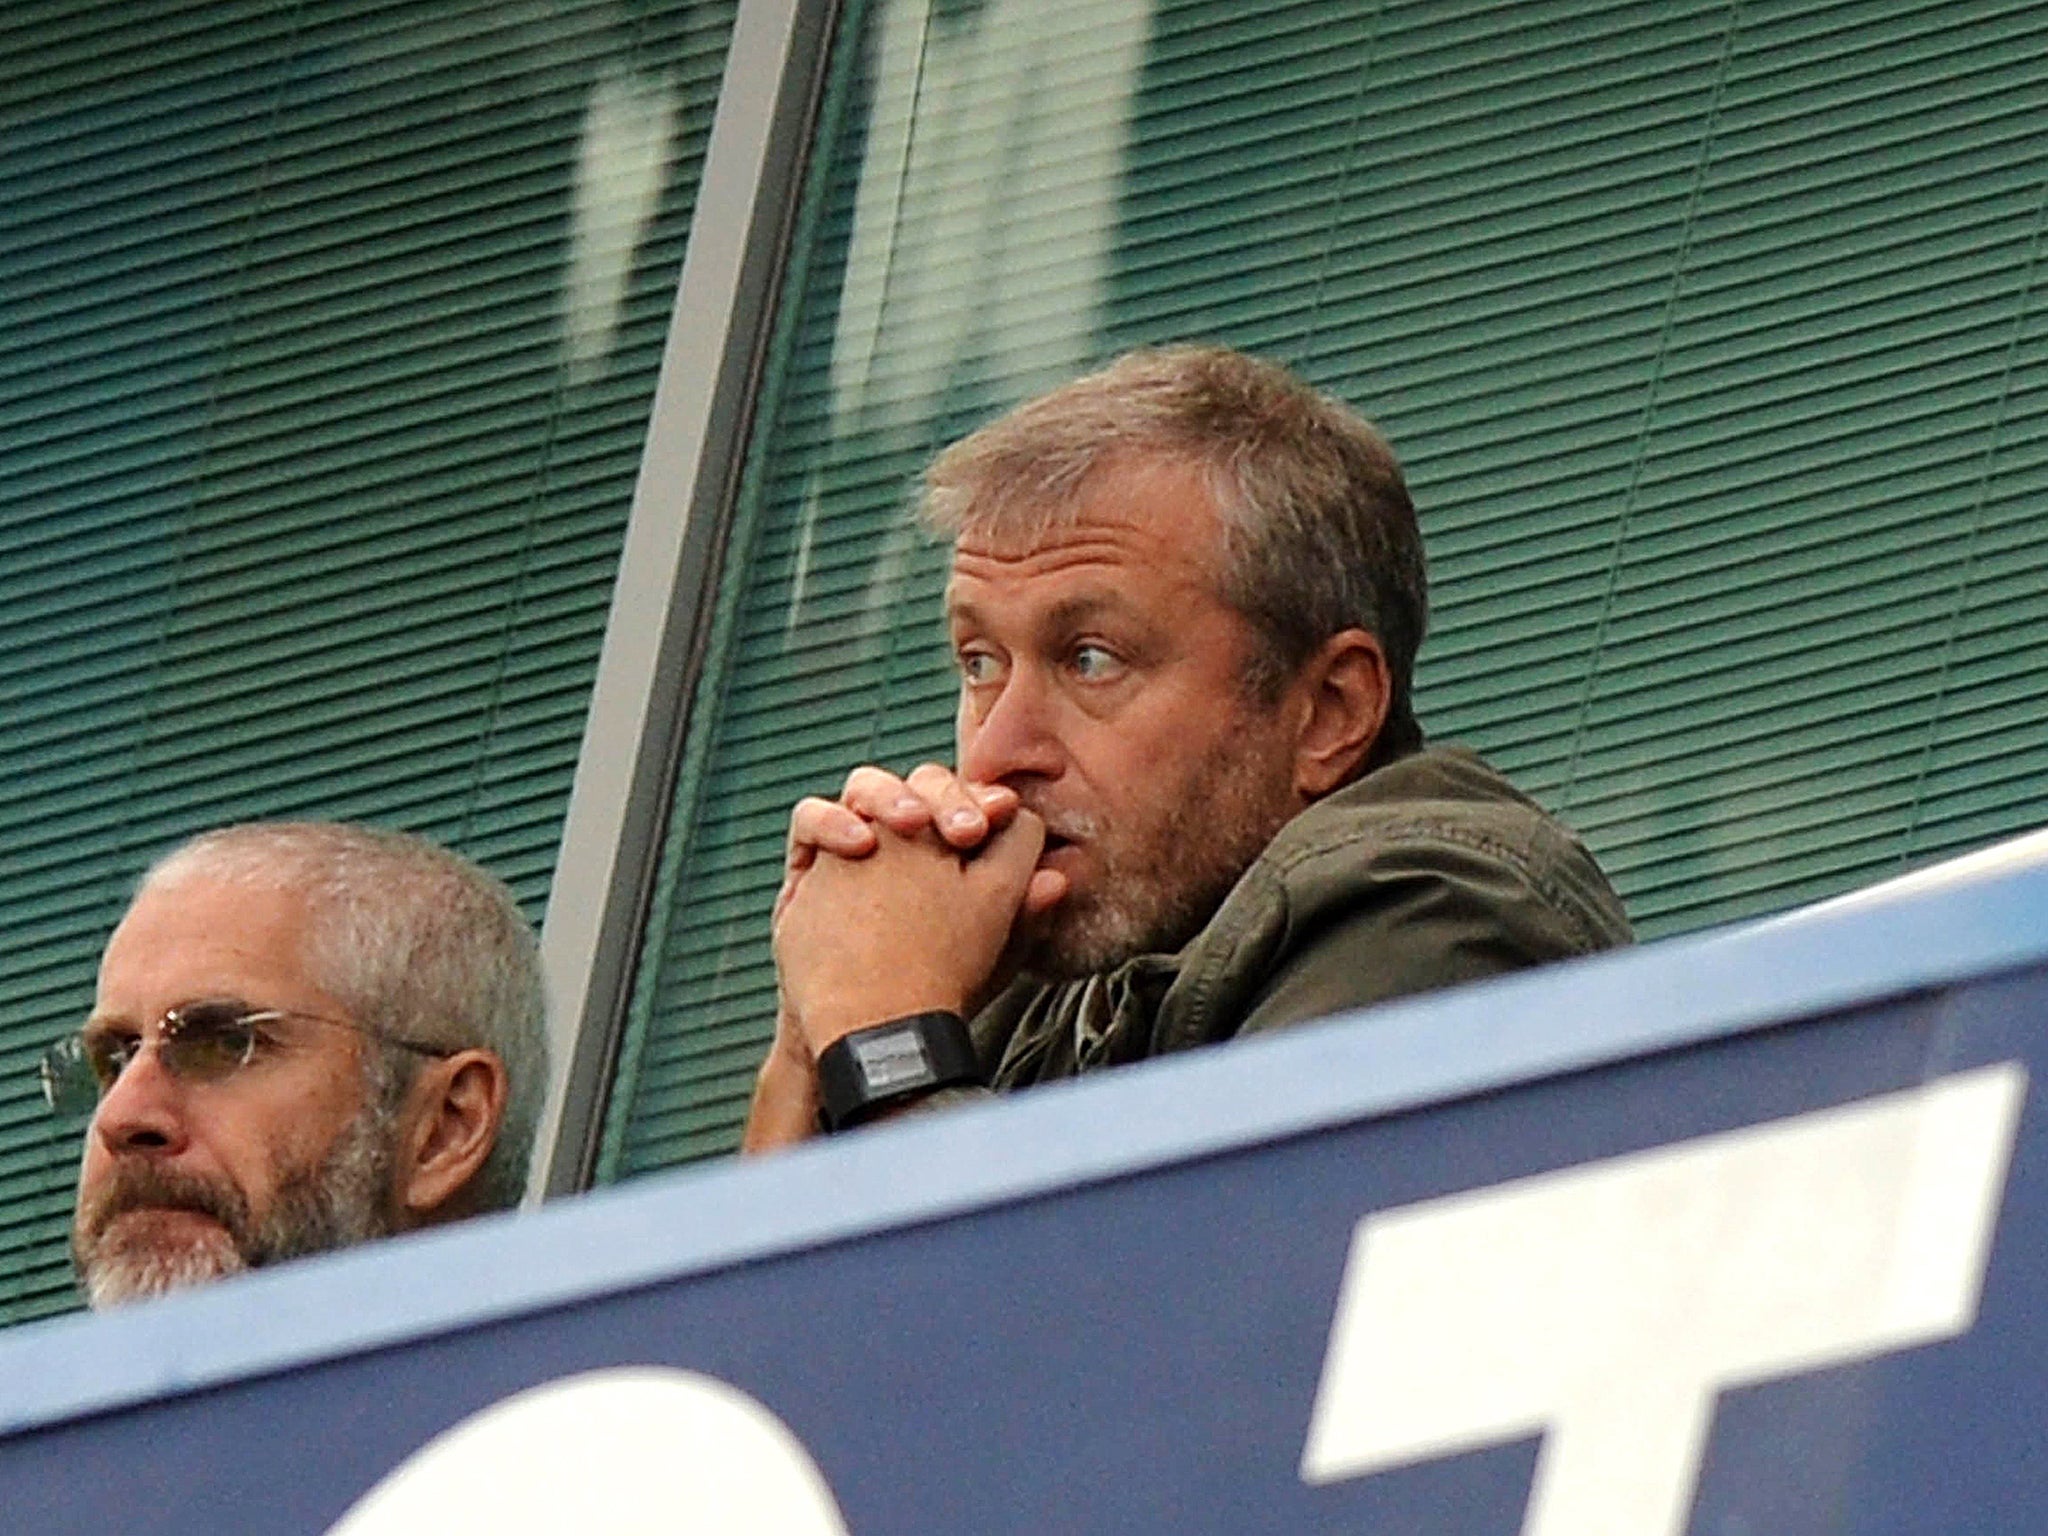 Roman Abramovich was the one, the person who, whenever wealthy club bosses were mentioned, would be cited immediately